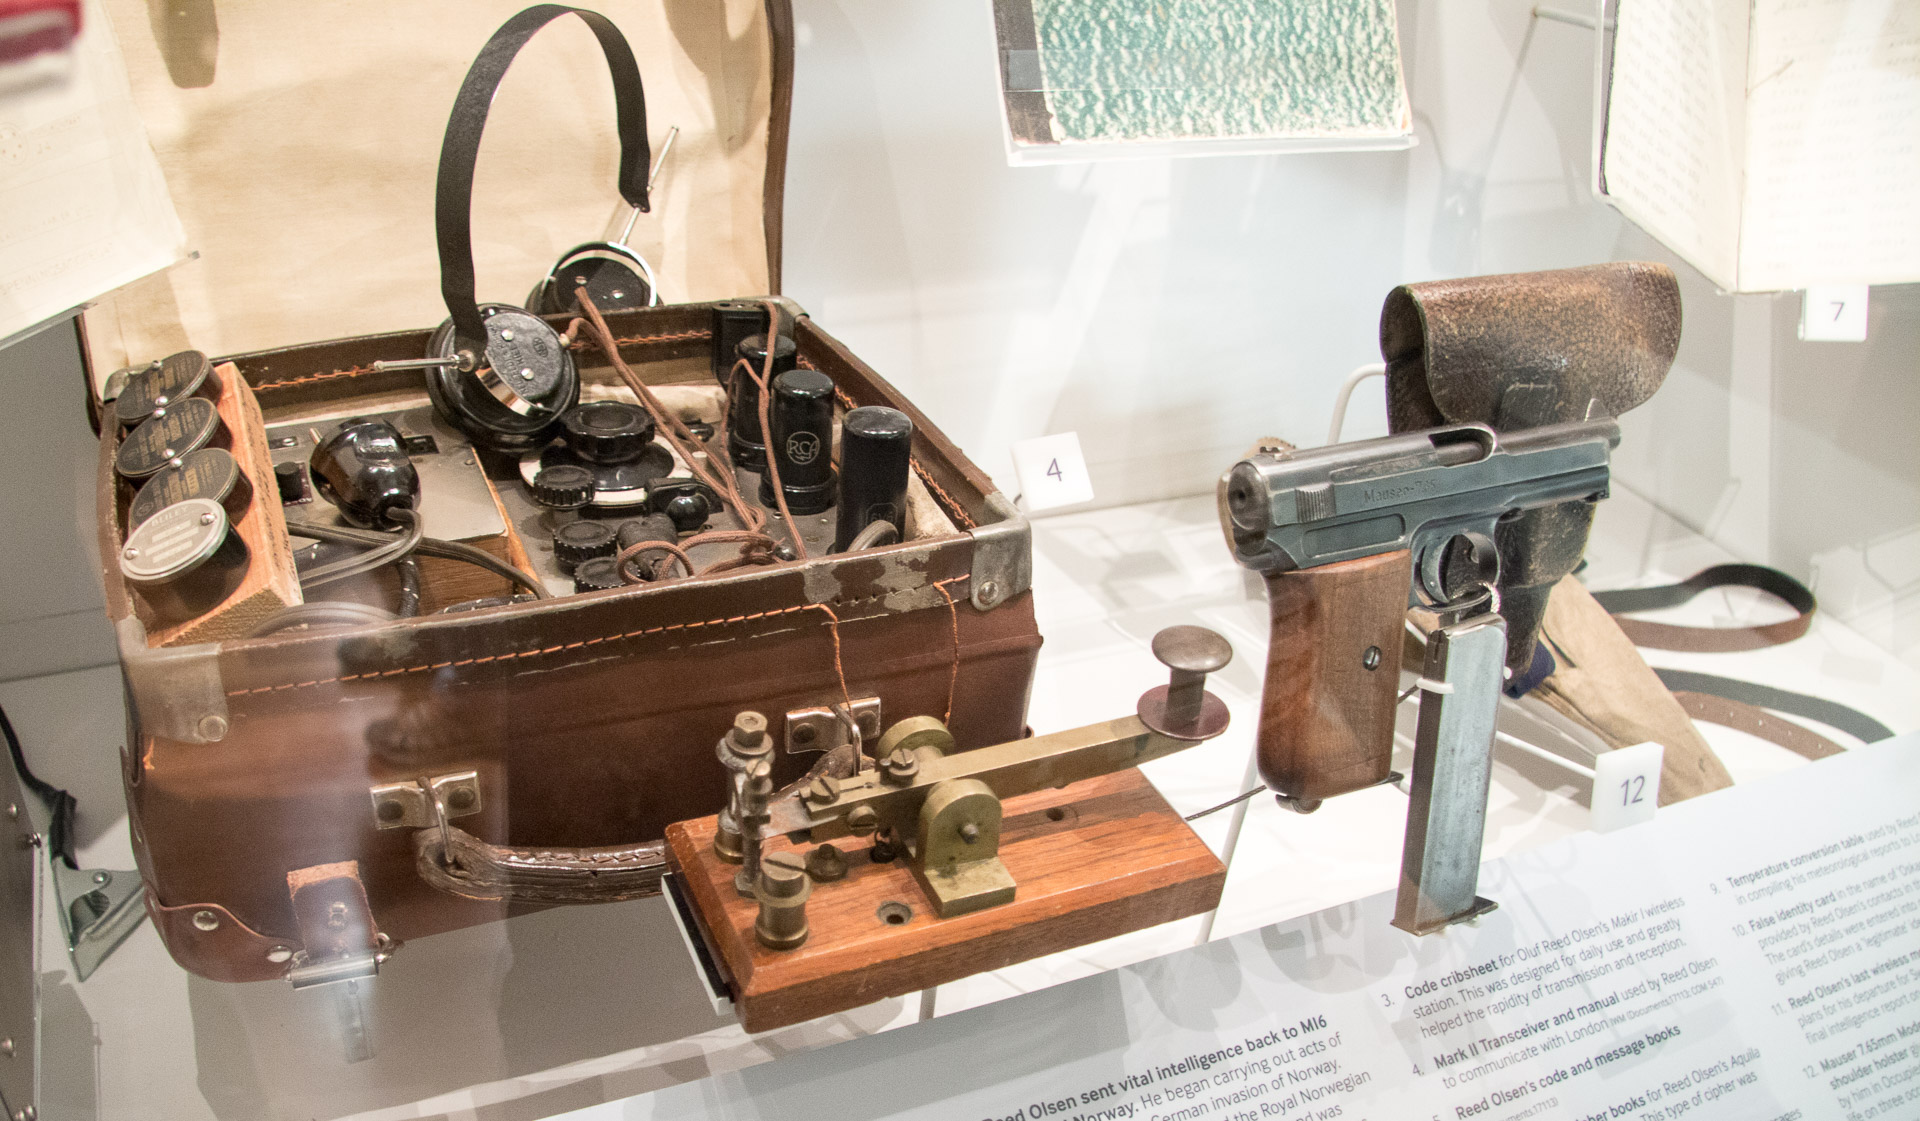 Mark II Transceiver used by Red Olsen at the Imperial War Museum in London